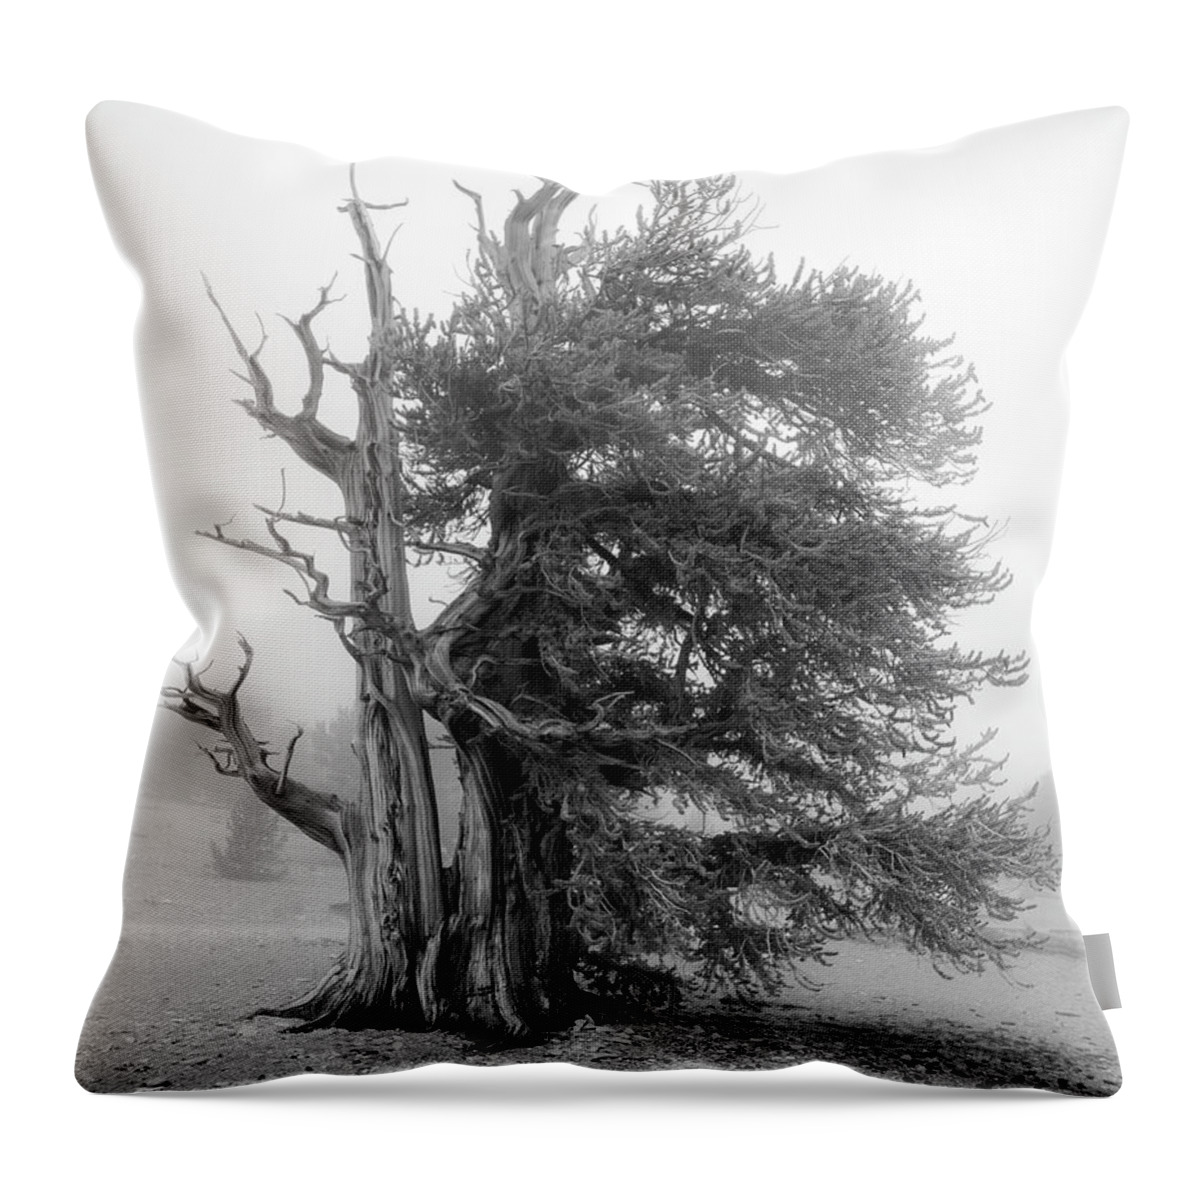 Bristlecone Throw Pillow featuring the photograph Bristlecone Mist by Dusty Wynne